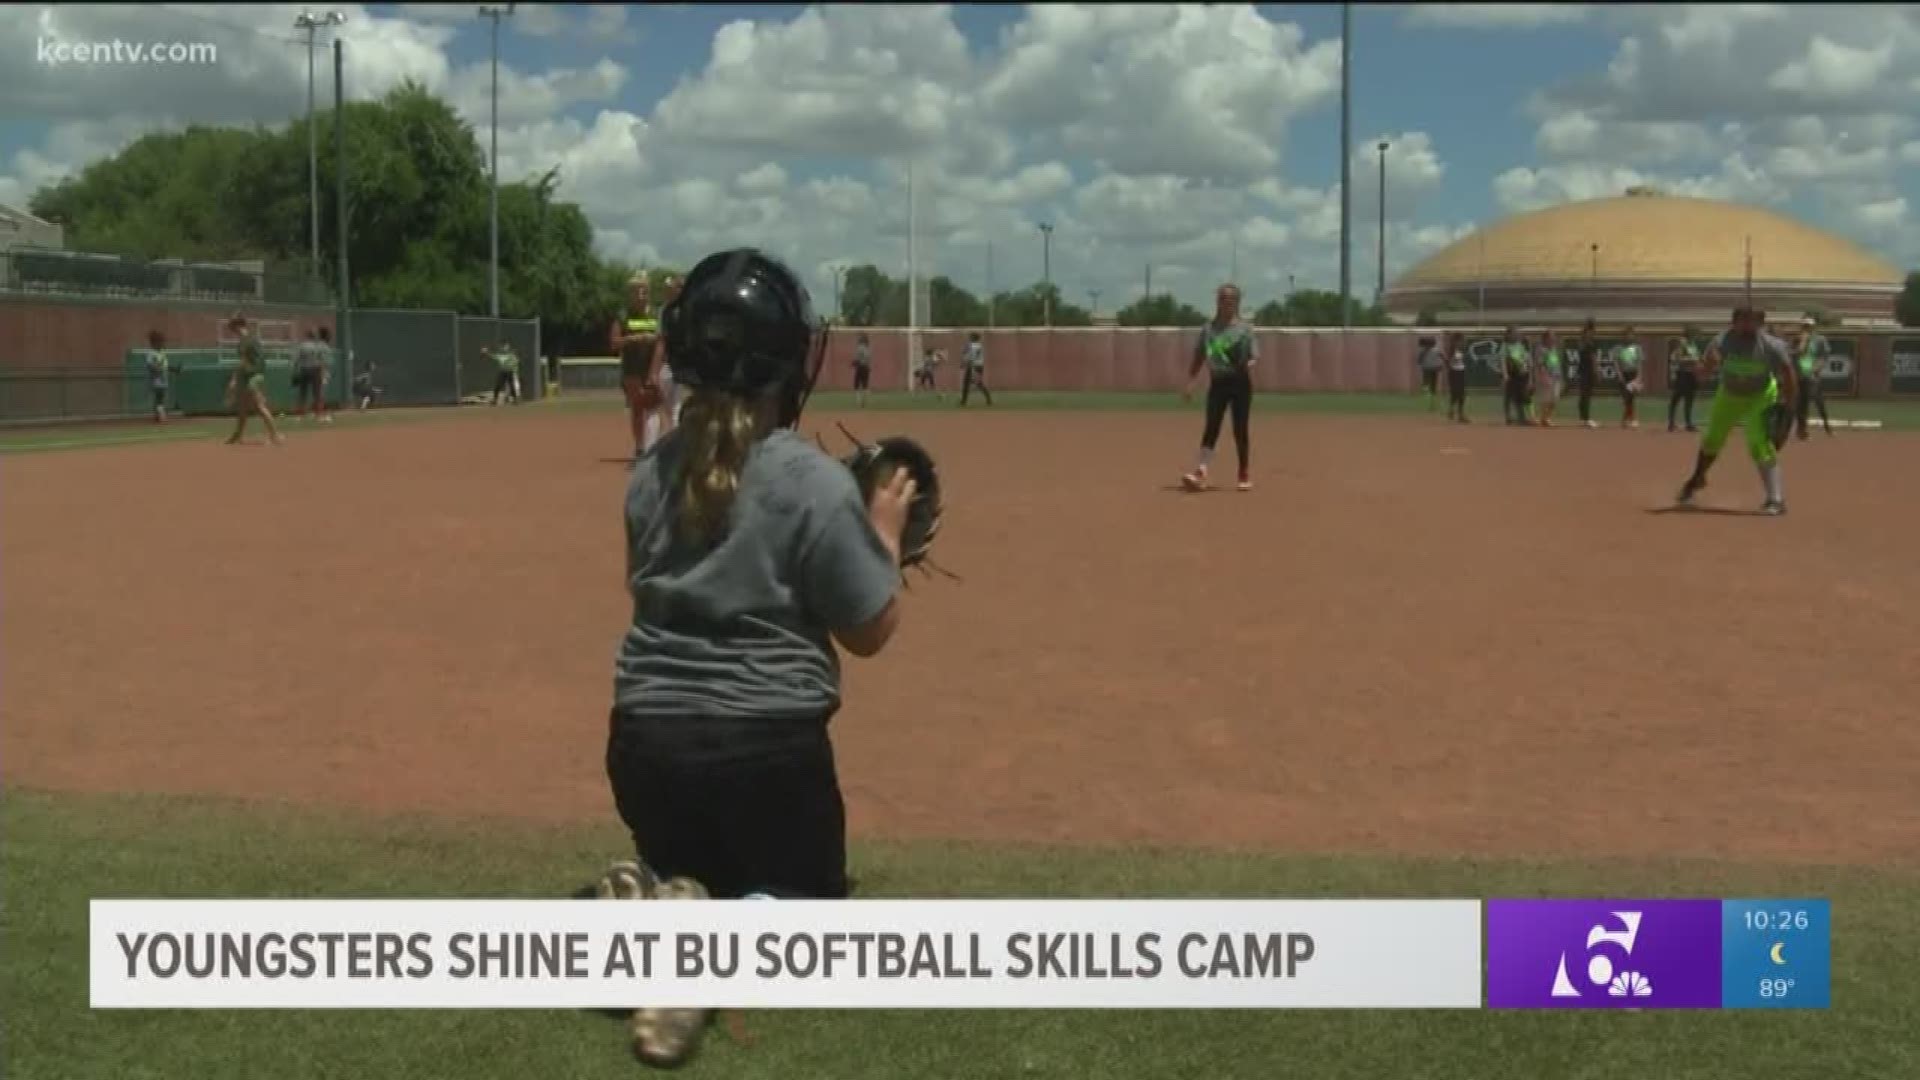 The future of Baylor Softball was on display the last few days at Getterman Stadium as the 12 and under all-skills camp wrapped up this afternoon. 